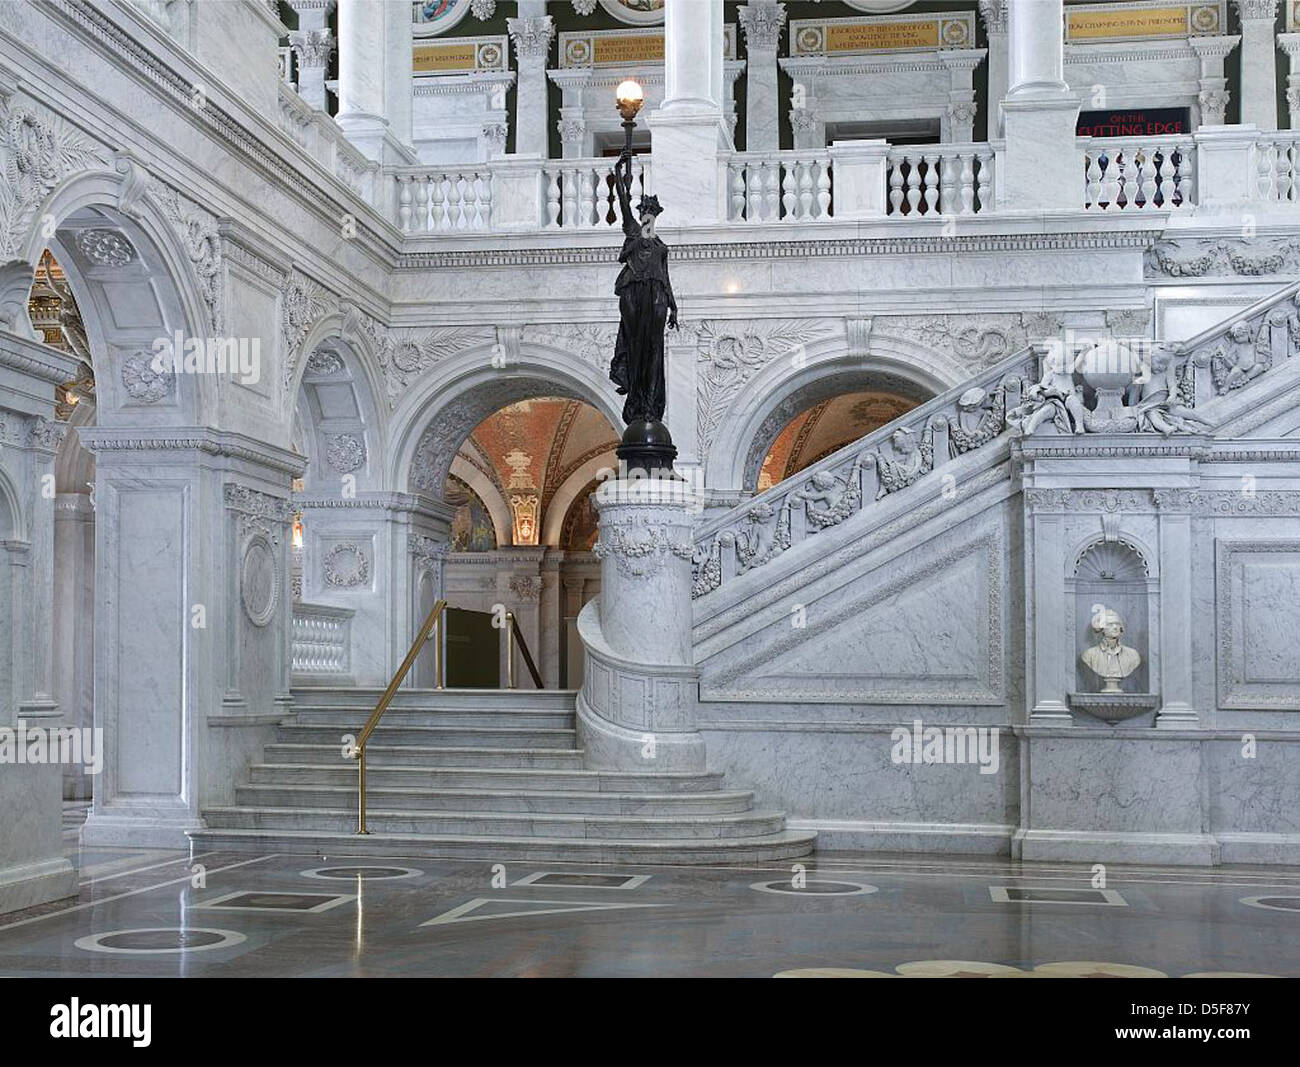 [Great Hall. View of grand staircase and bronze statue of female figure on newel post holding a torch of electric light, with bust of Thomas Jefferson at right. Library of Congress Thomas Jefferson Building, Washington, D.C.] (LOC) Stock Photo